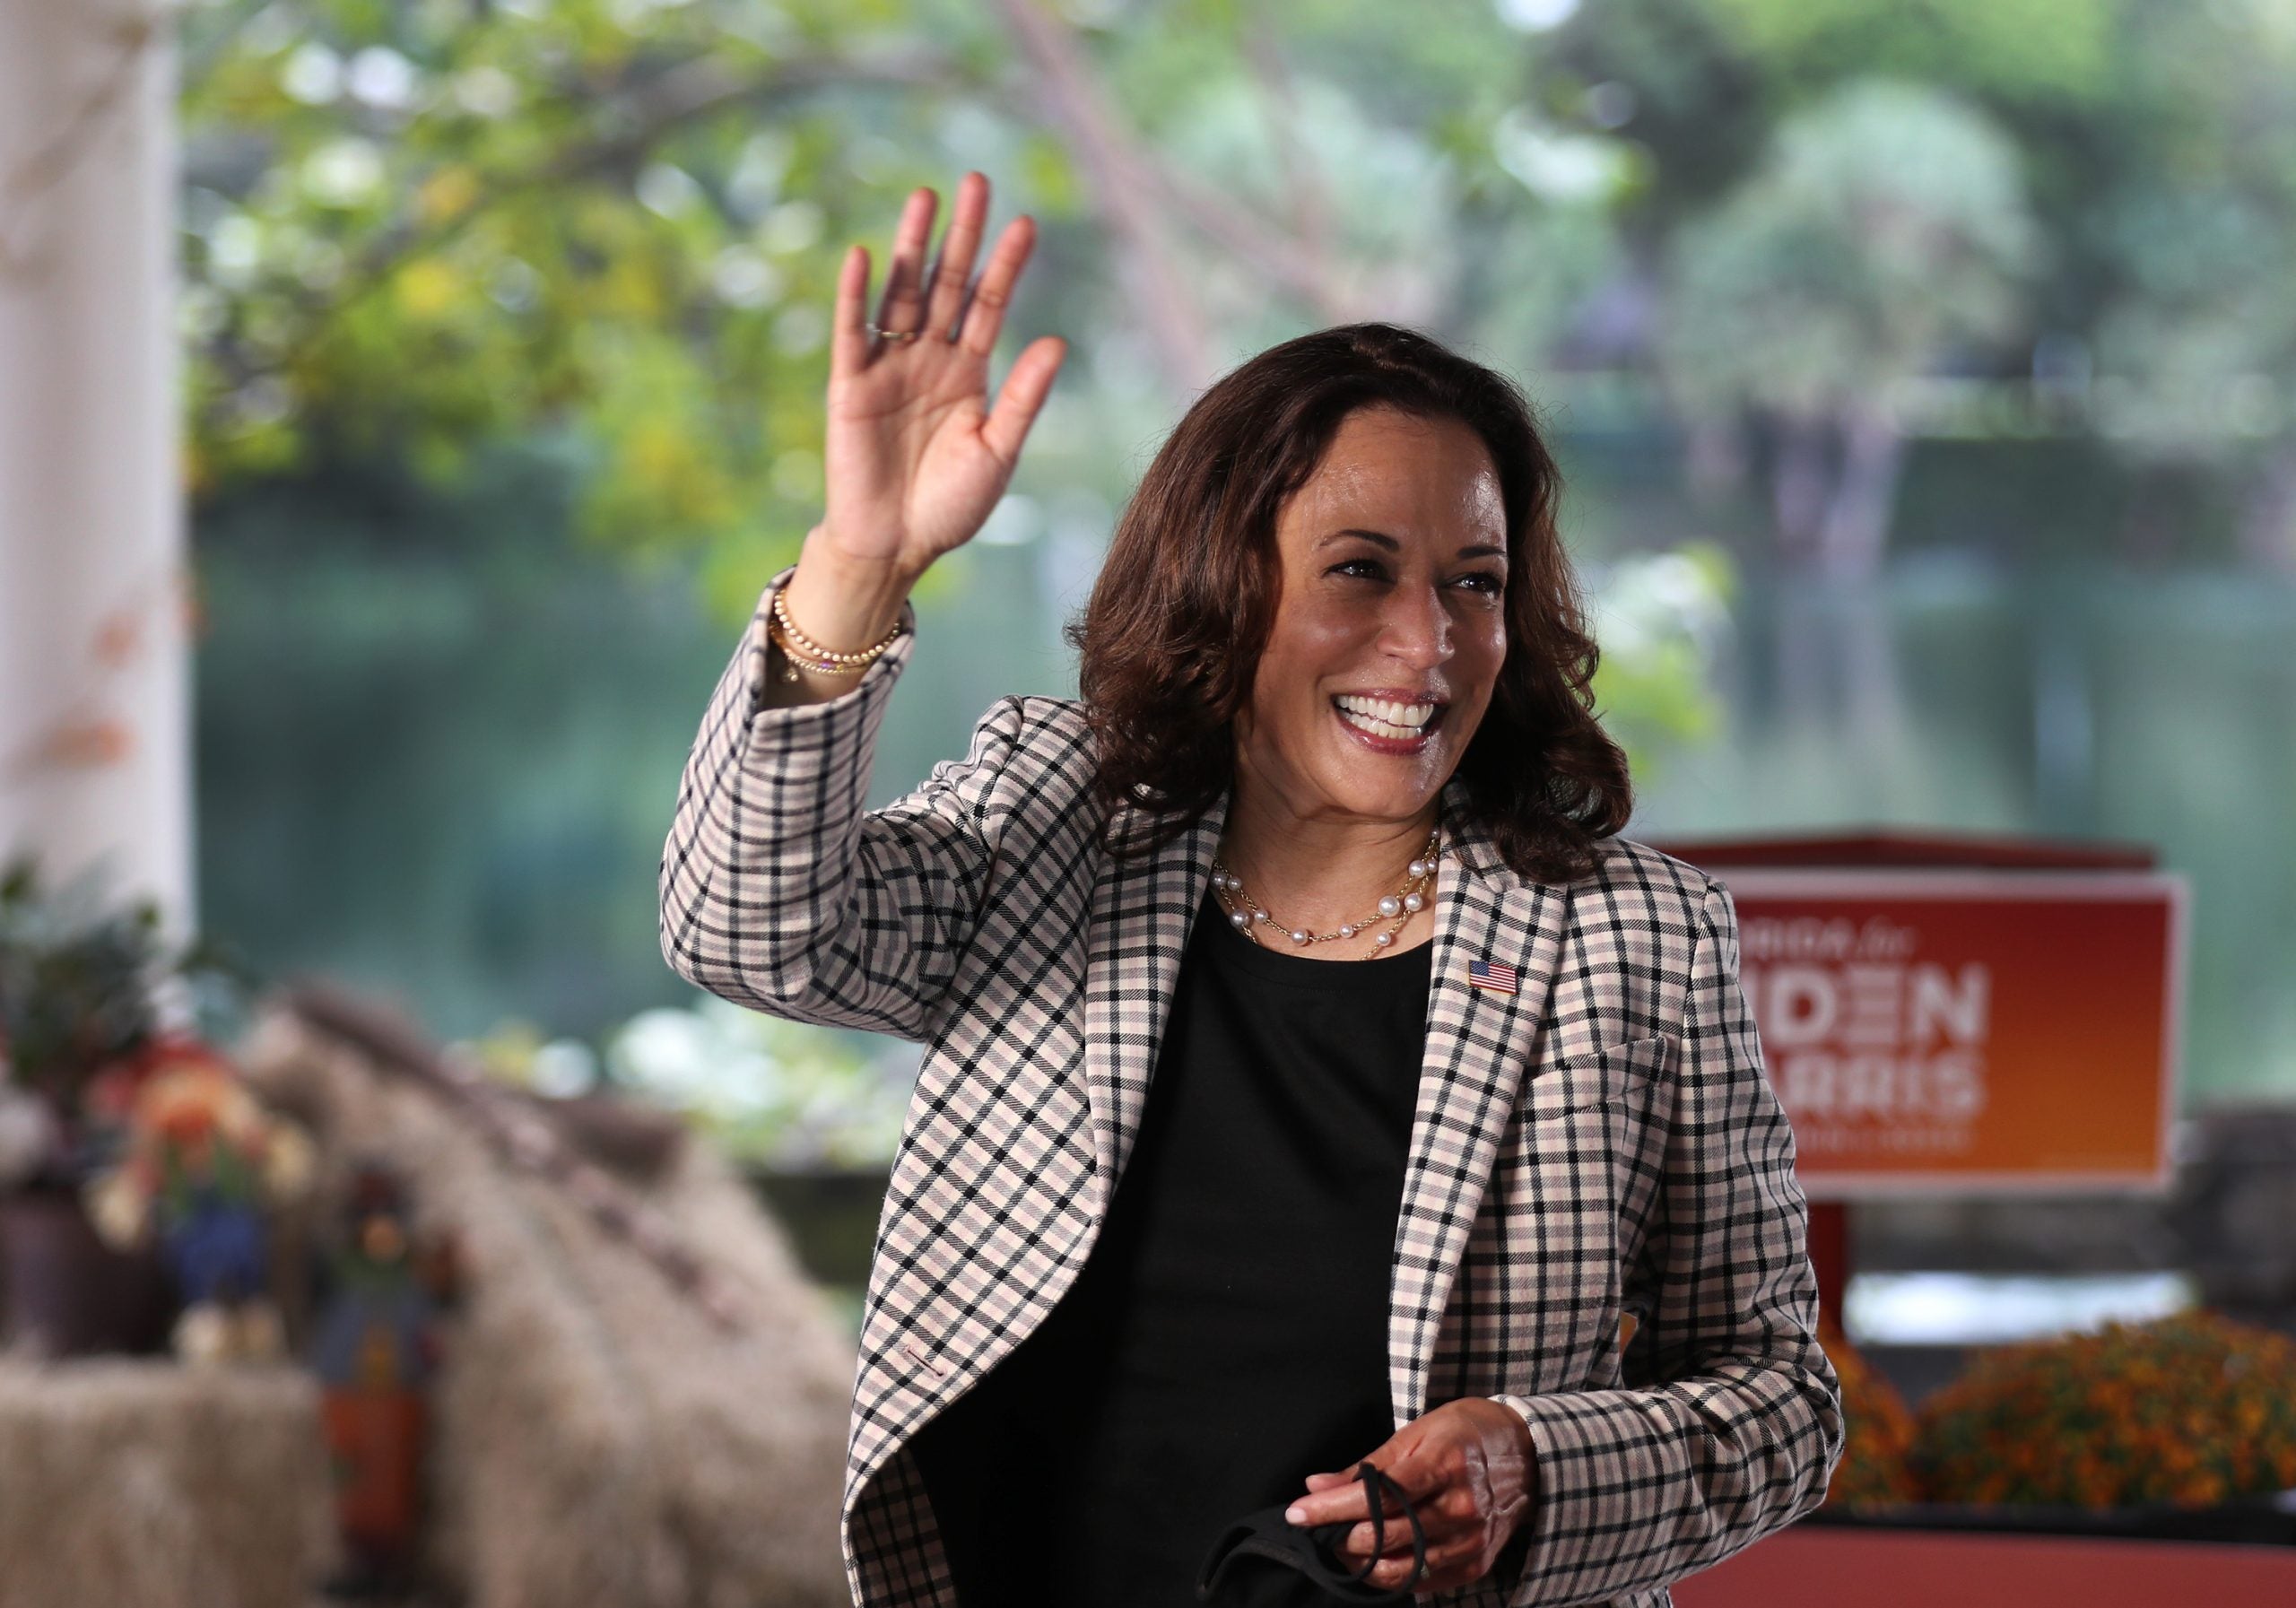 The Best Fashion Moments From Vice-President Elect Kamala Harris